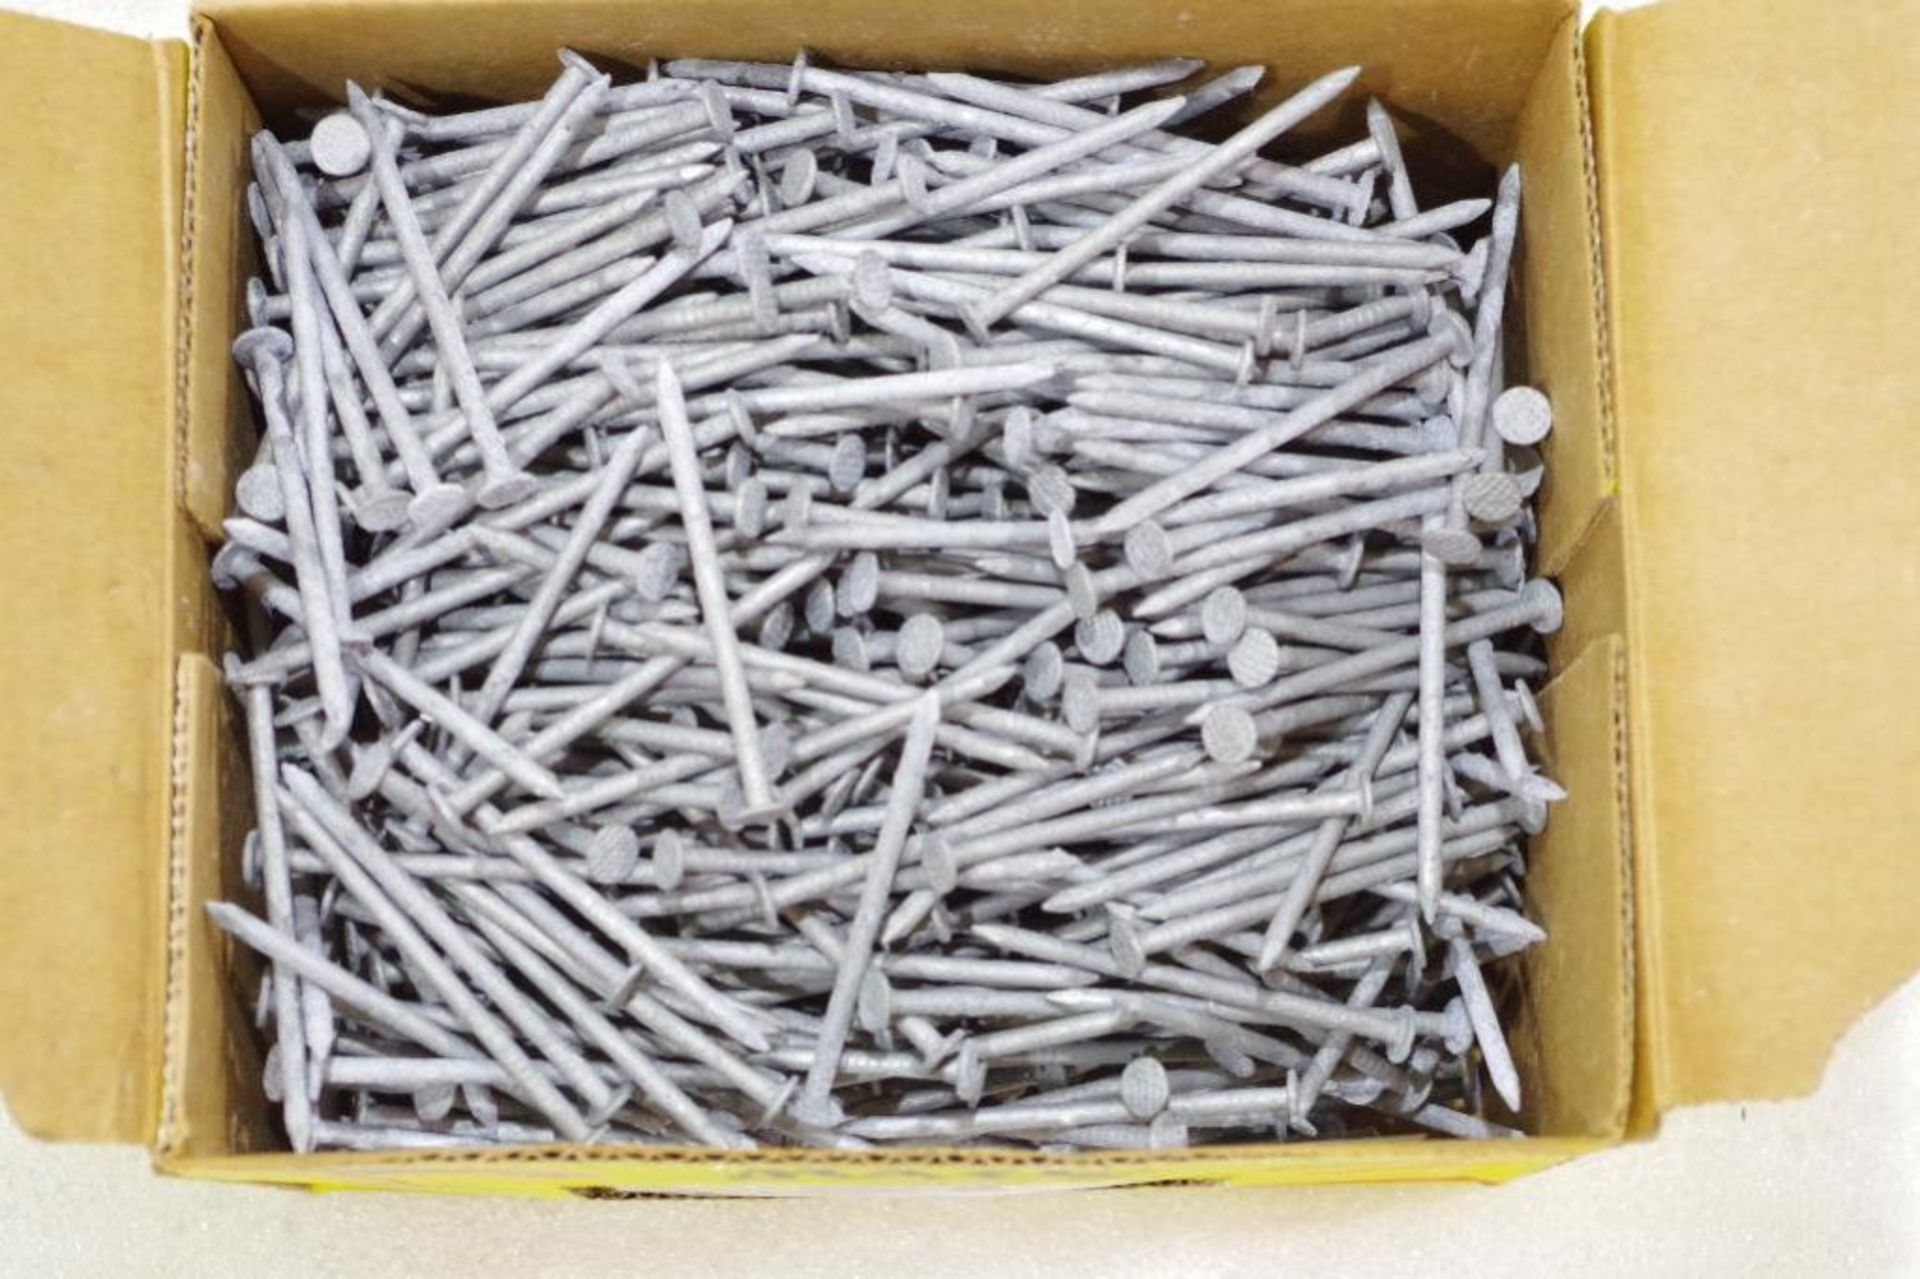 (30) Lbs. MAZE Stormguard Hot-Dip Galvanized Box Nail 2" 6d M/N S205, Made in USA (6 Boxes 5 Lbs.) - Image 7 of 7